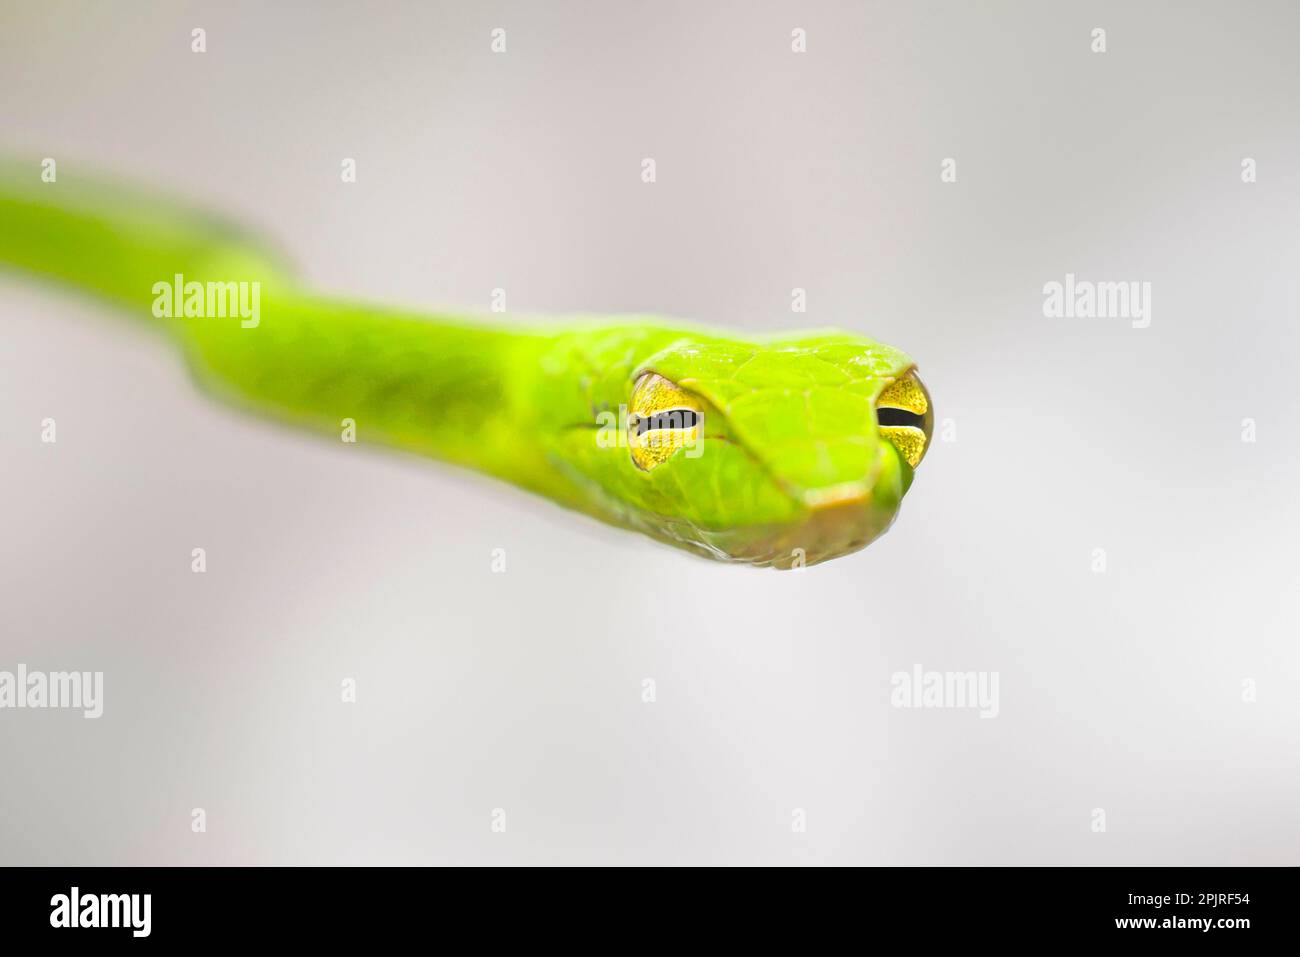 Green whip snake, Green tree sniffer, Green whip snakes, Green tree sniffers, Other animals, Reptiles, Snakes, Animals, Oriental Whip Stock Photo